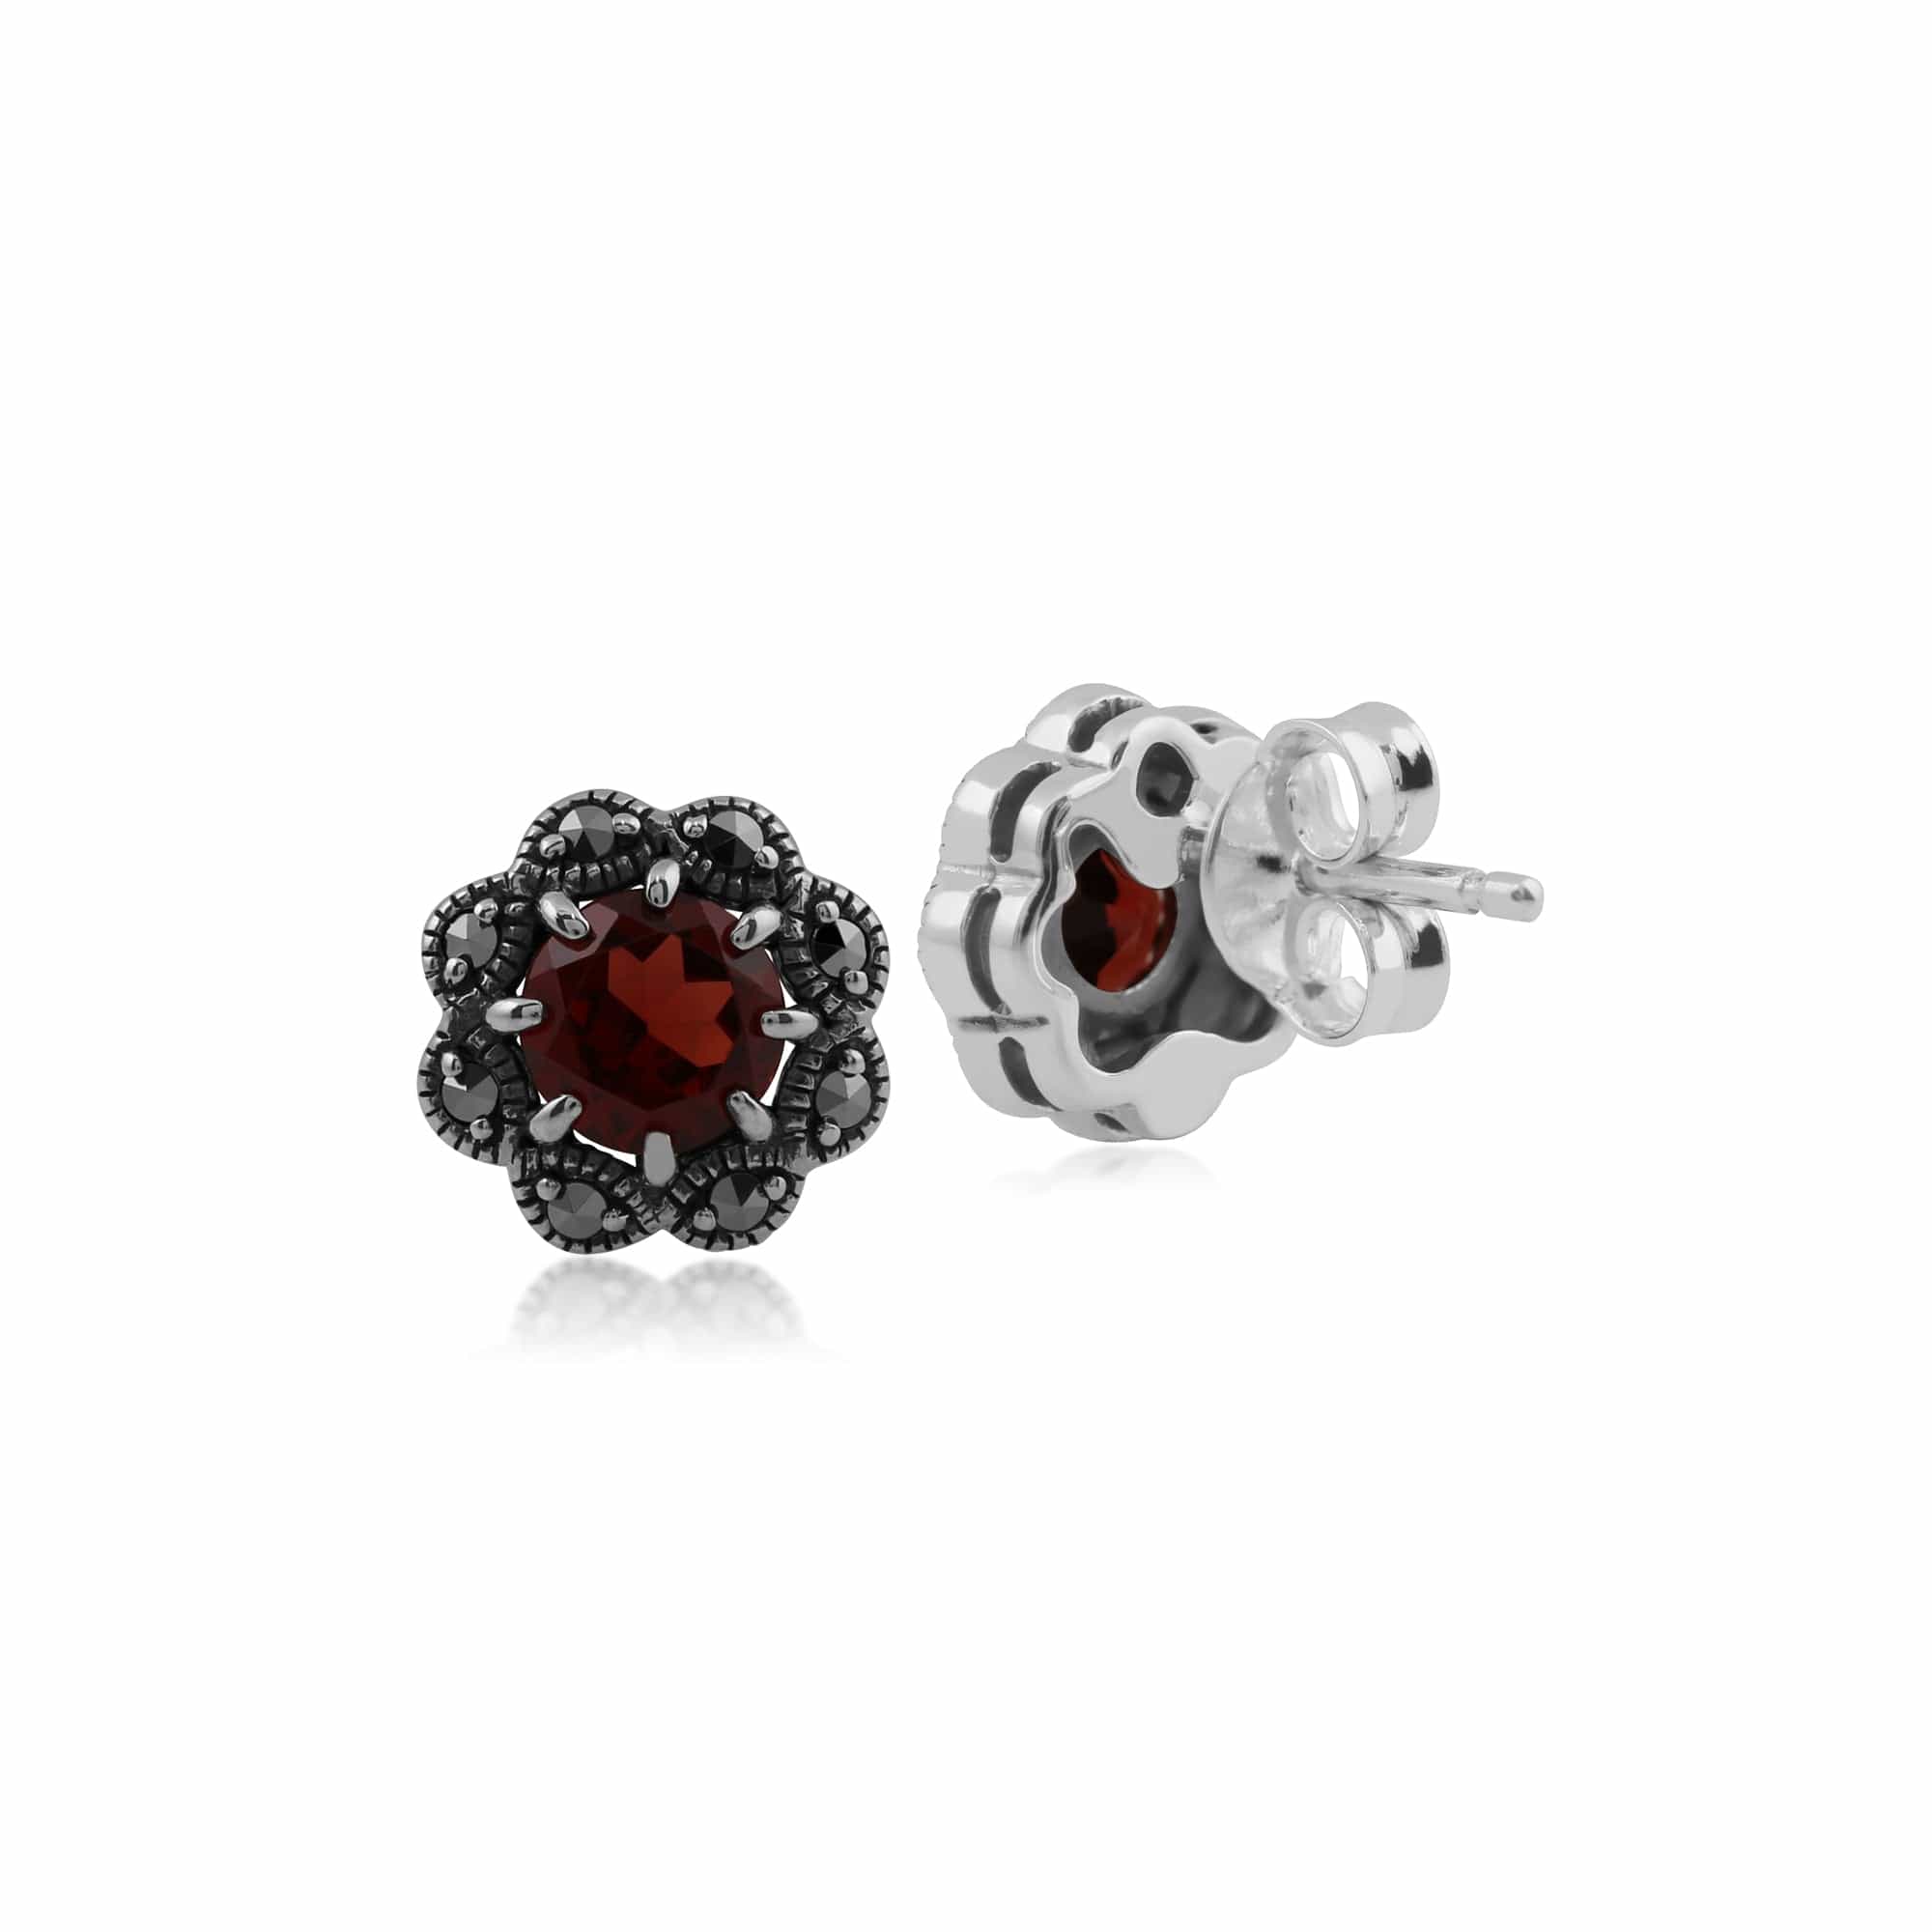 214E731505925 Floral Round Garnet & Marcasite Cluster Stud Earrings in 925 Sterling Silver 2